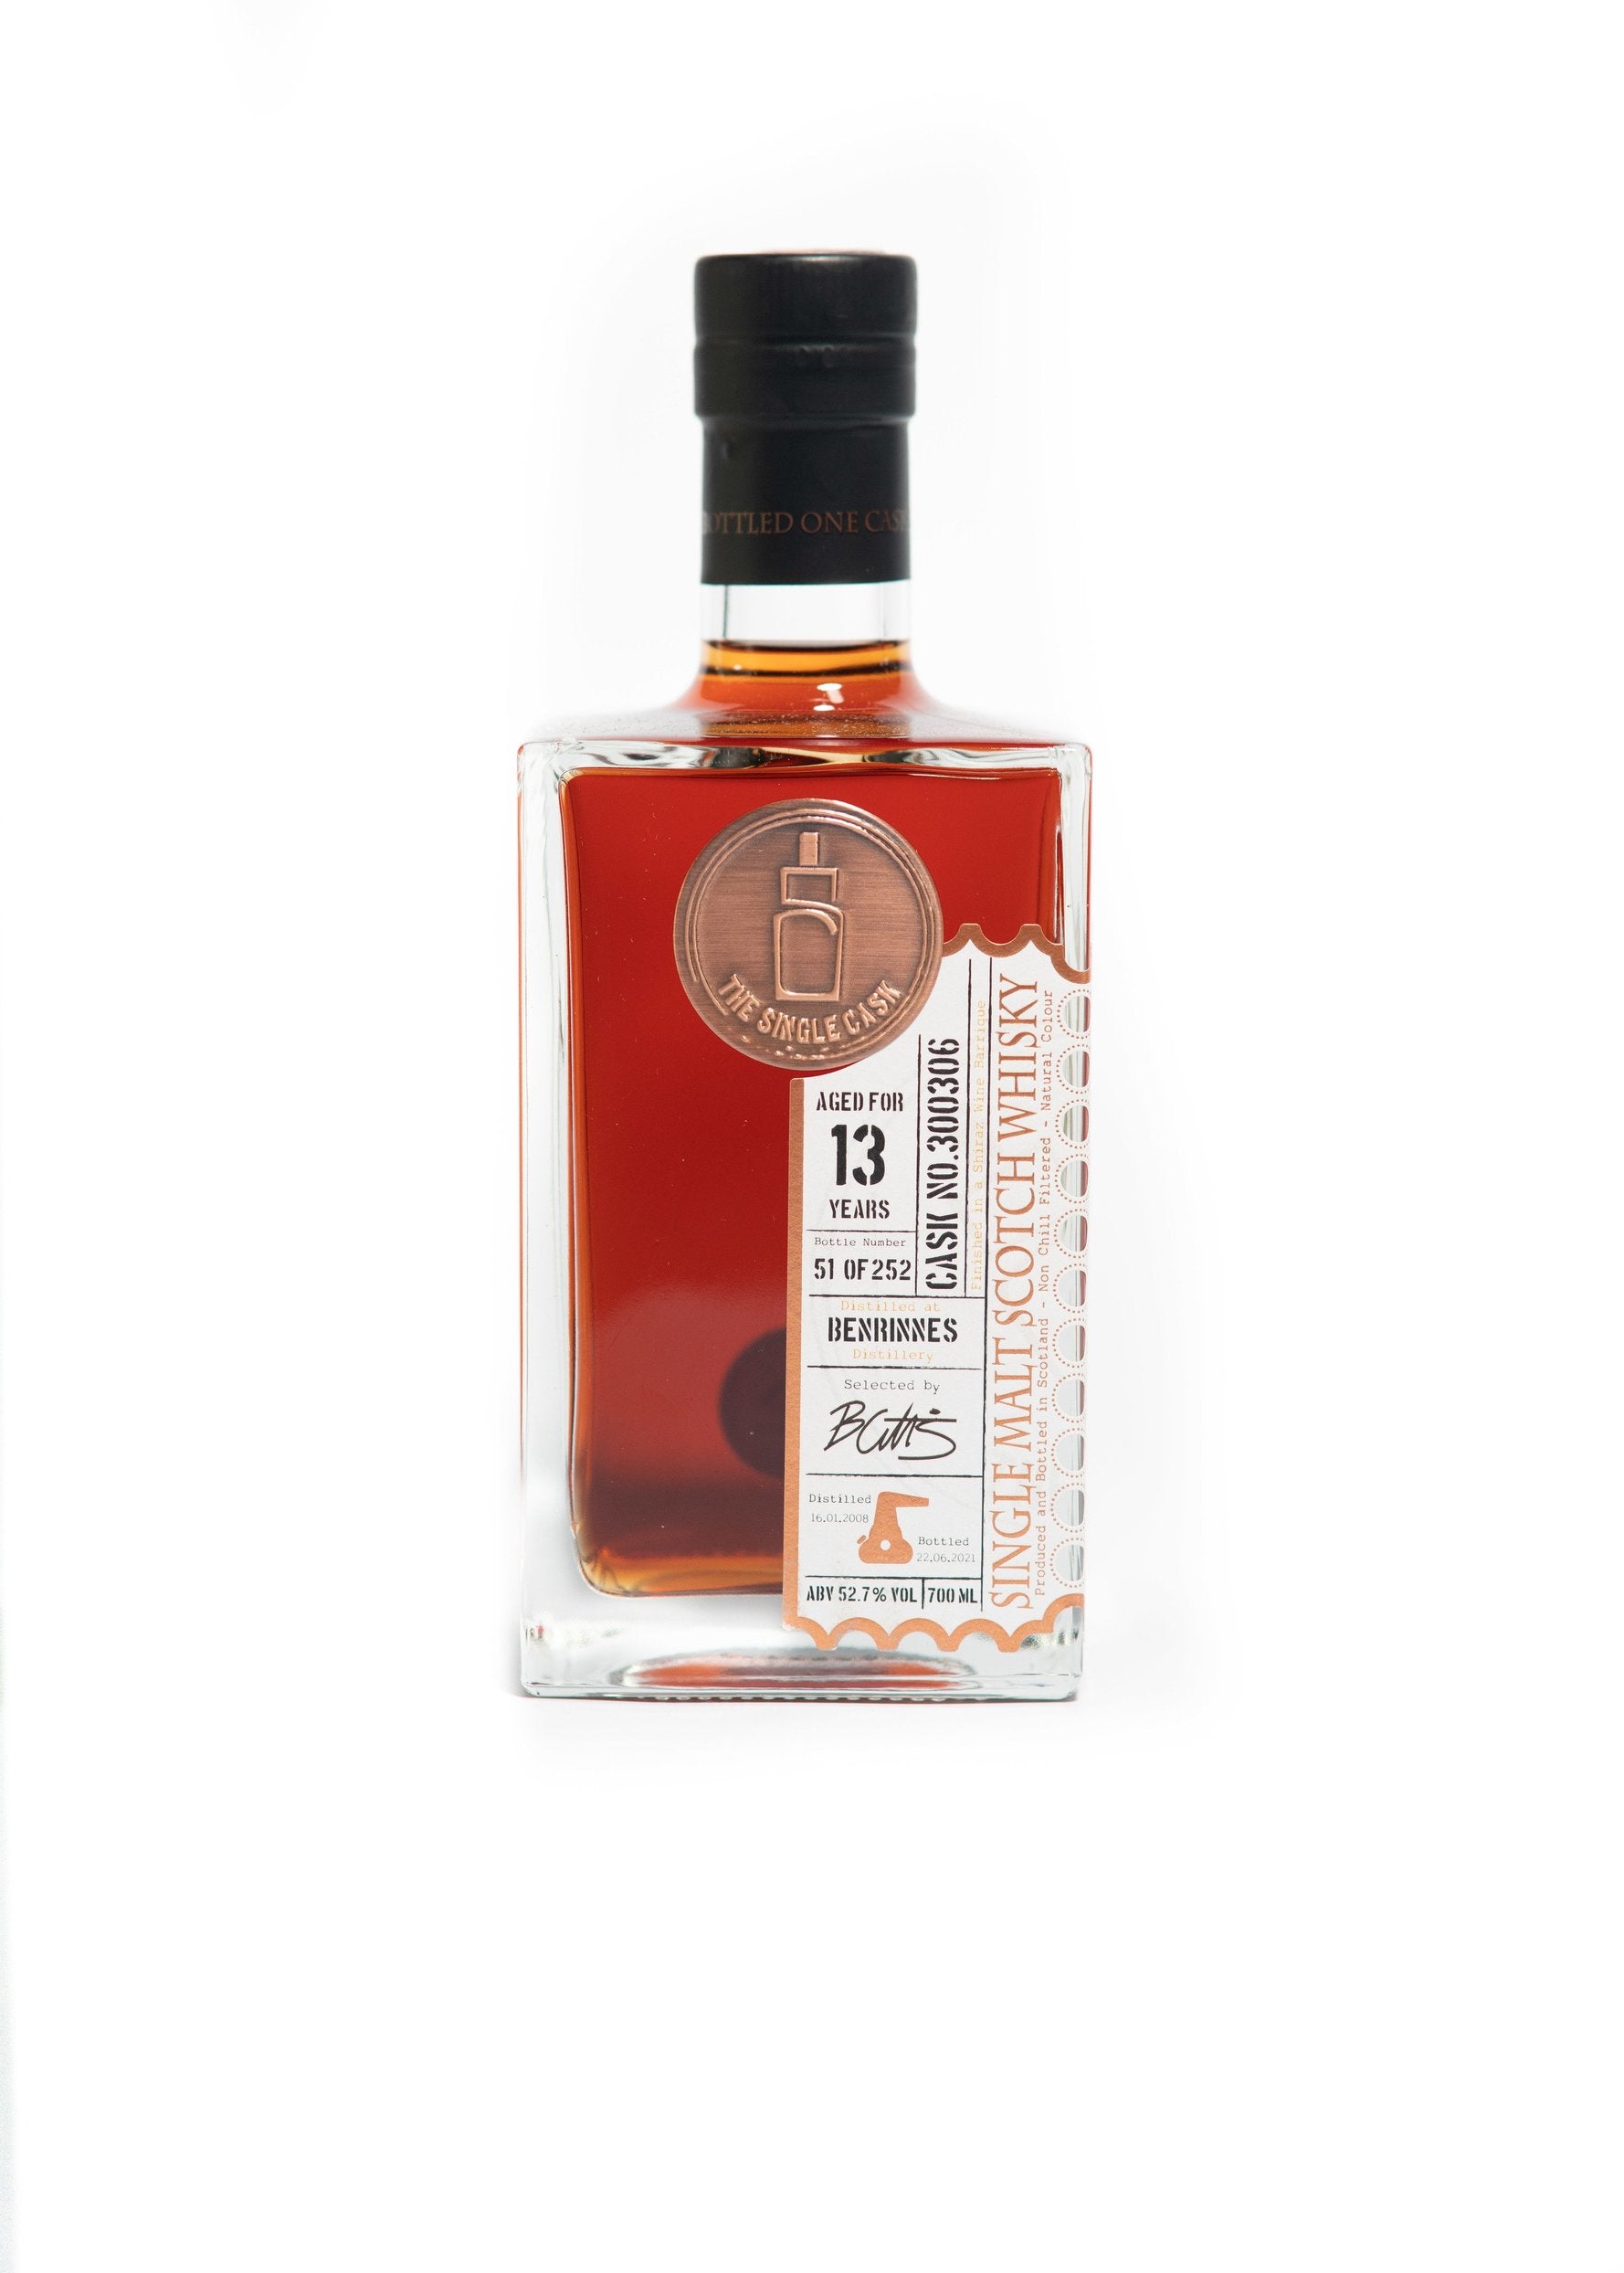 The Single Cask Benrinnes 13 year old scotch whisky